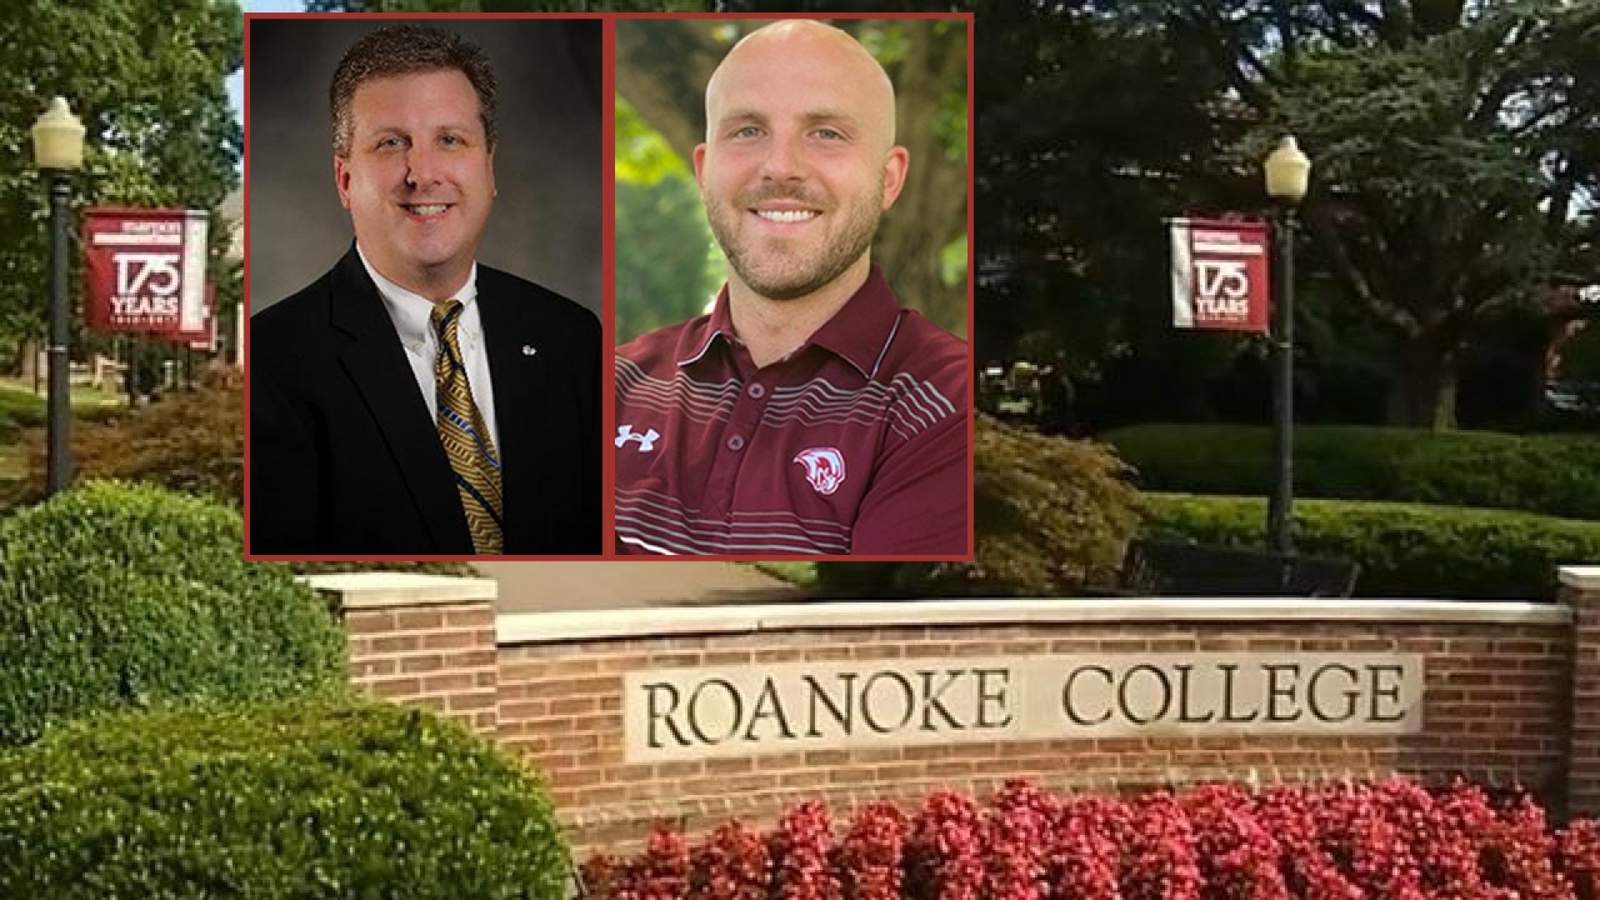 Dean and baseball coach out at Roanoke College after Title IX investigation